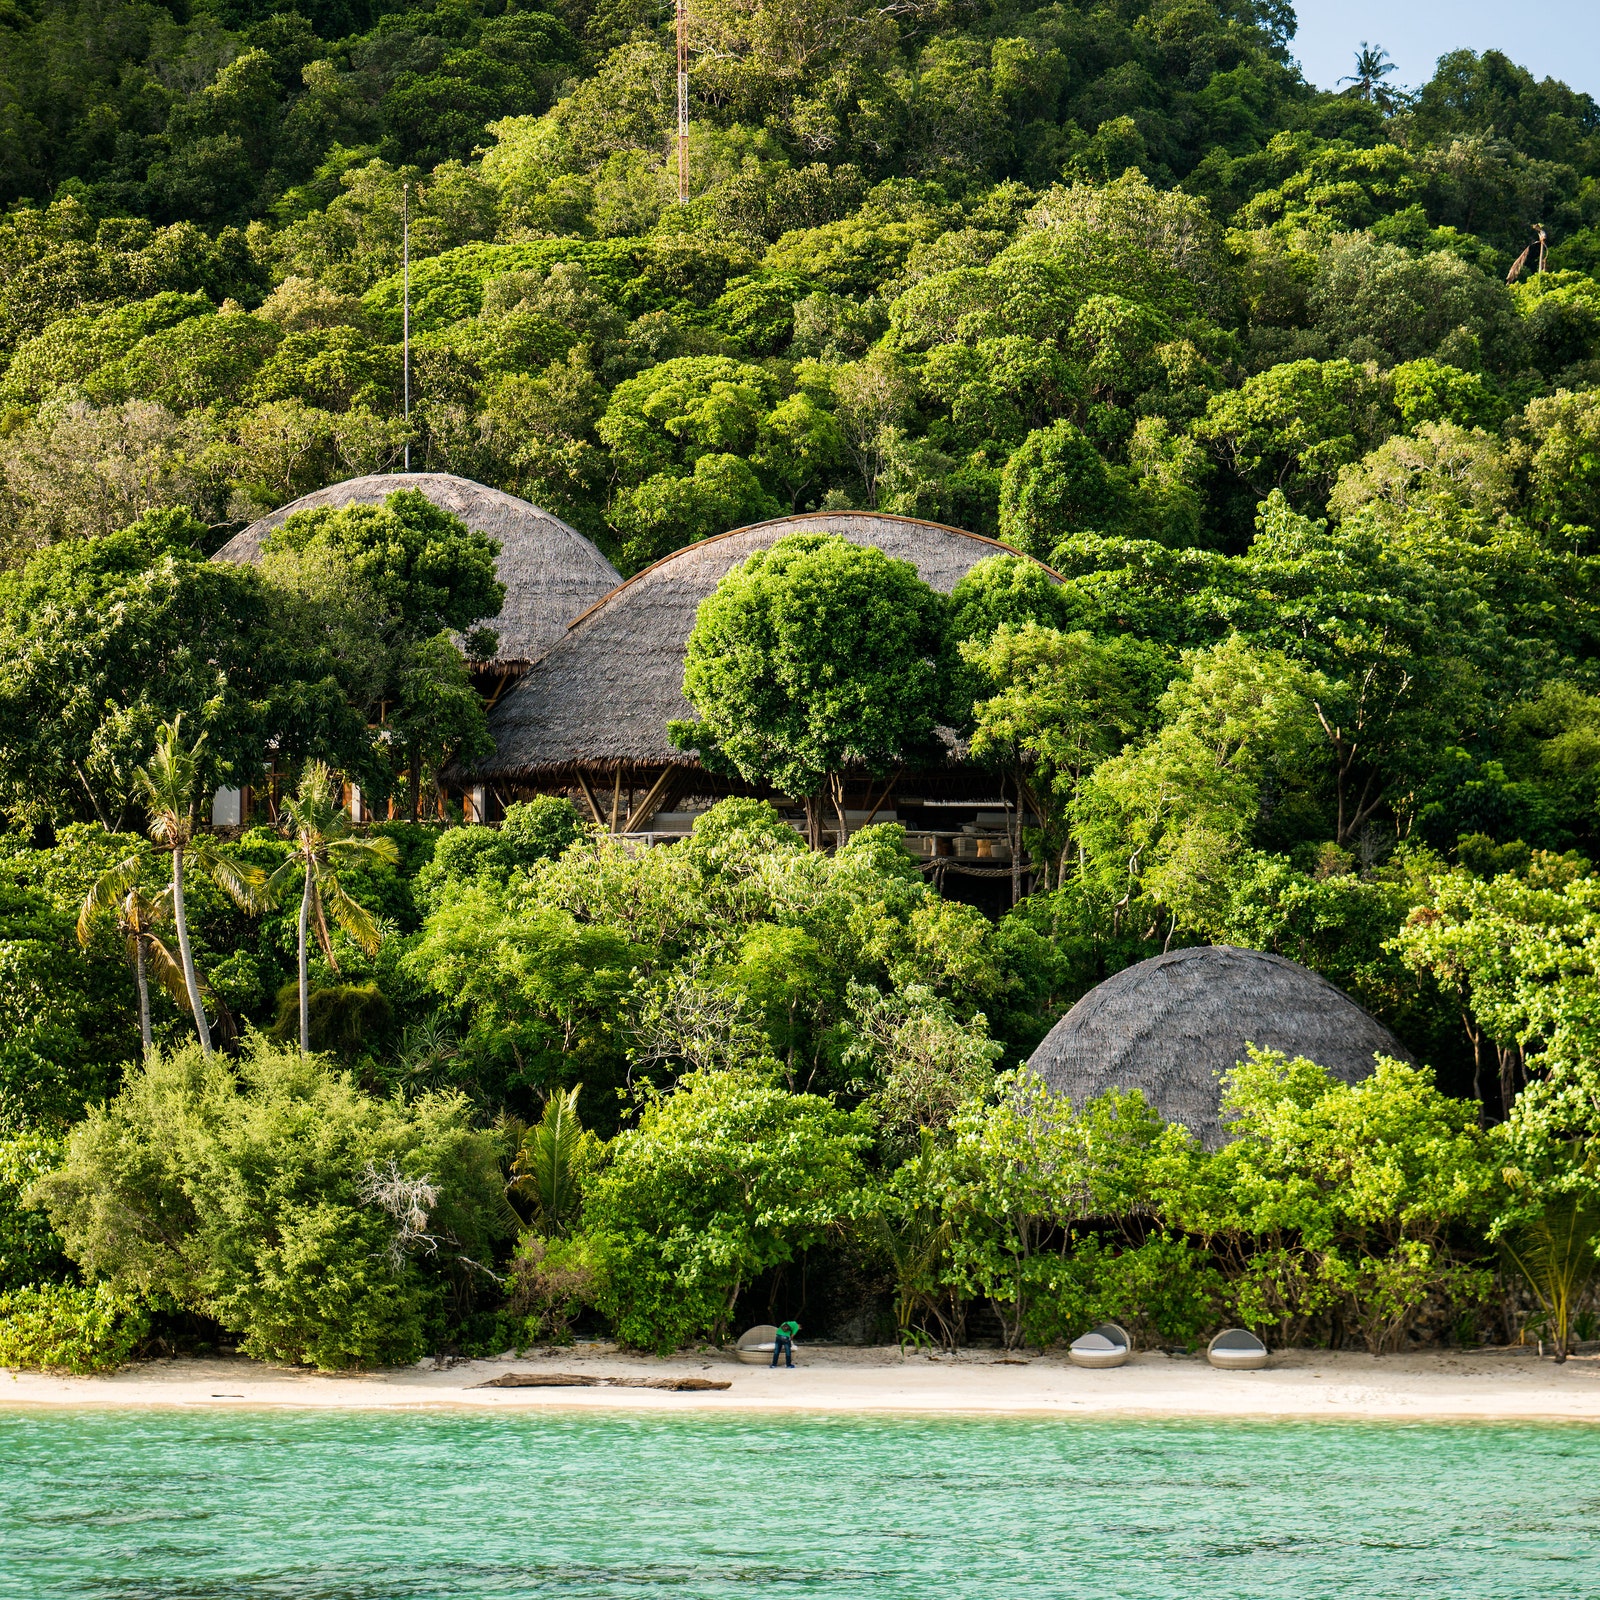 From Eco-Resorts to Safari Lodges, These Hotels Are All About Sustainability